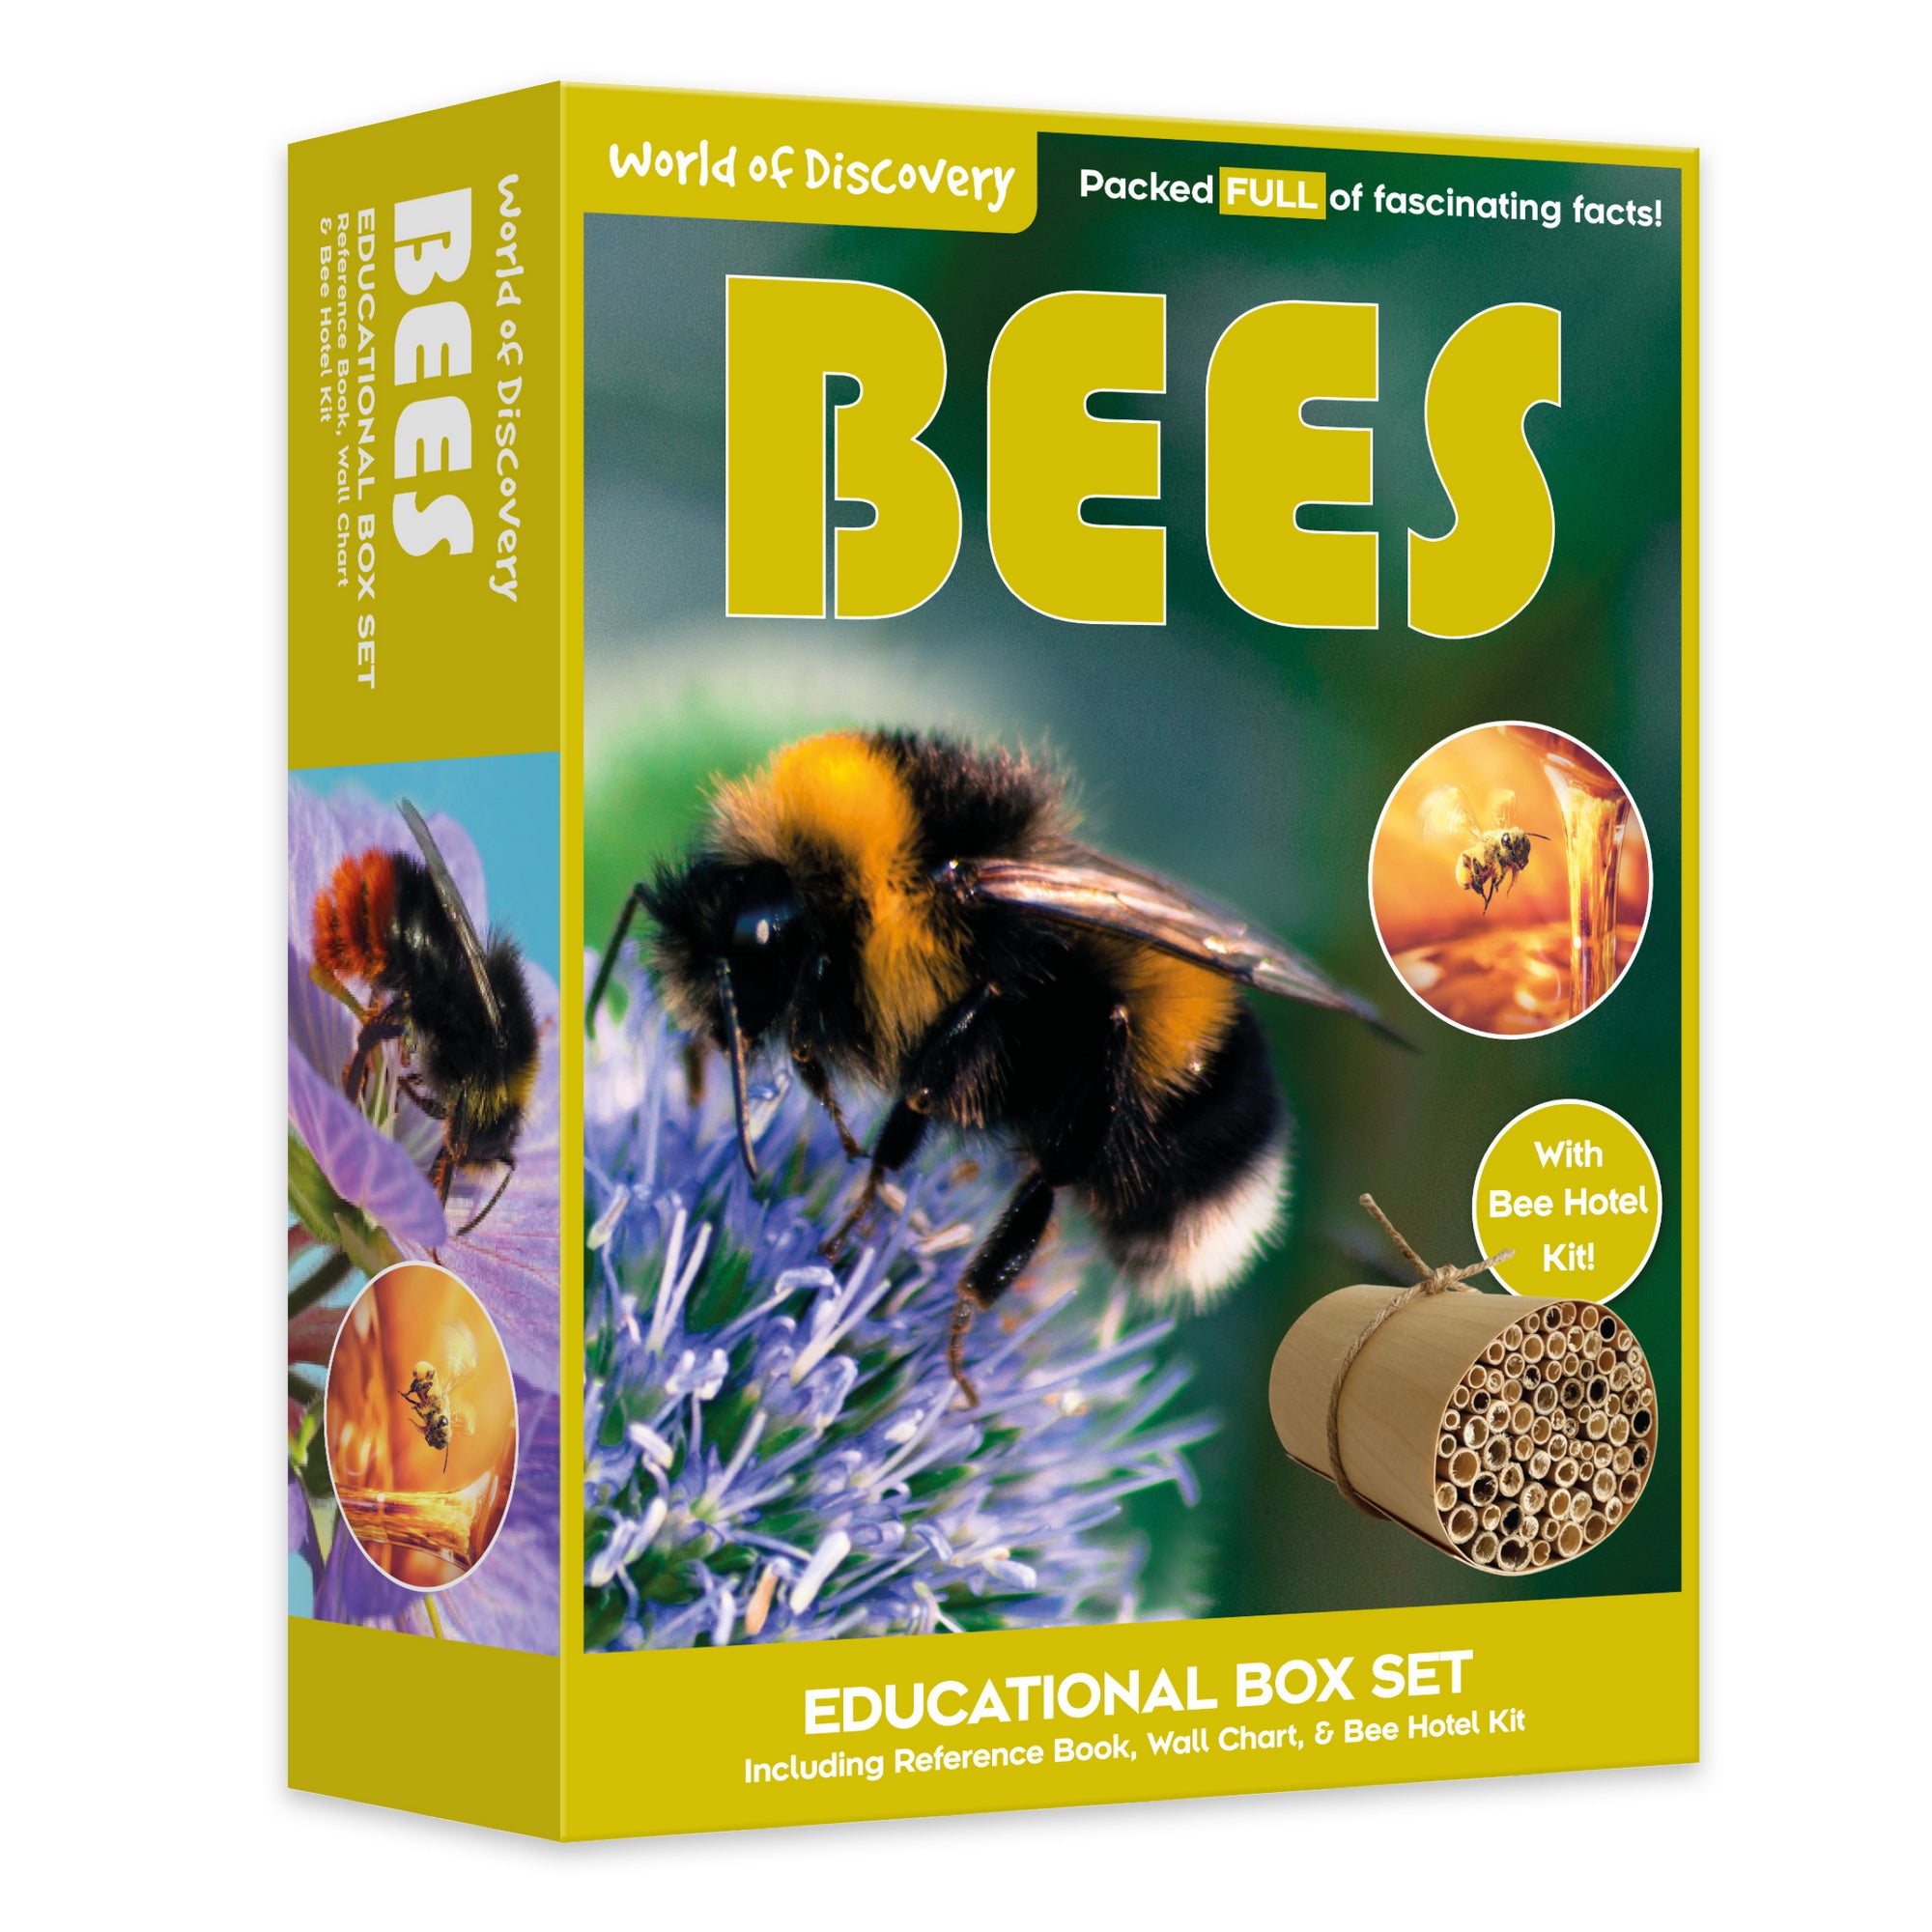 World of Discovery Bees Educational Box Set